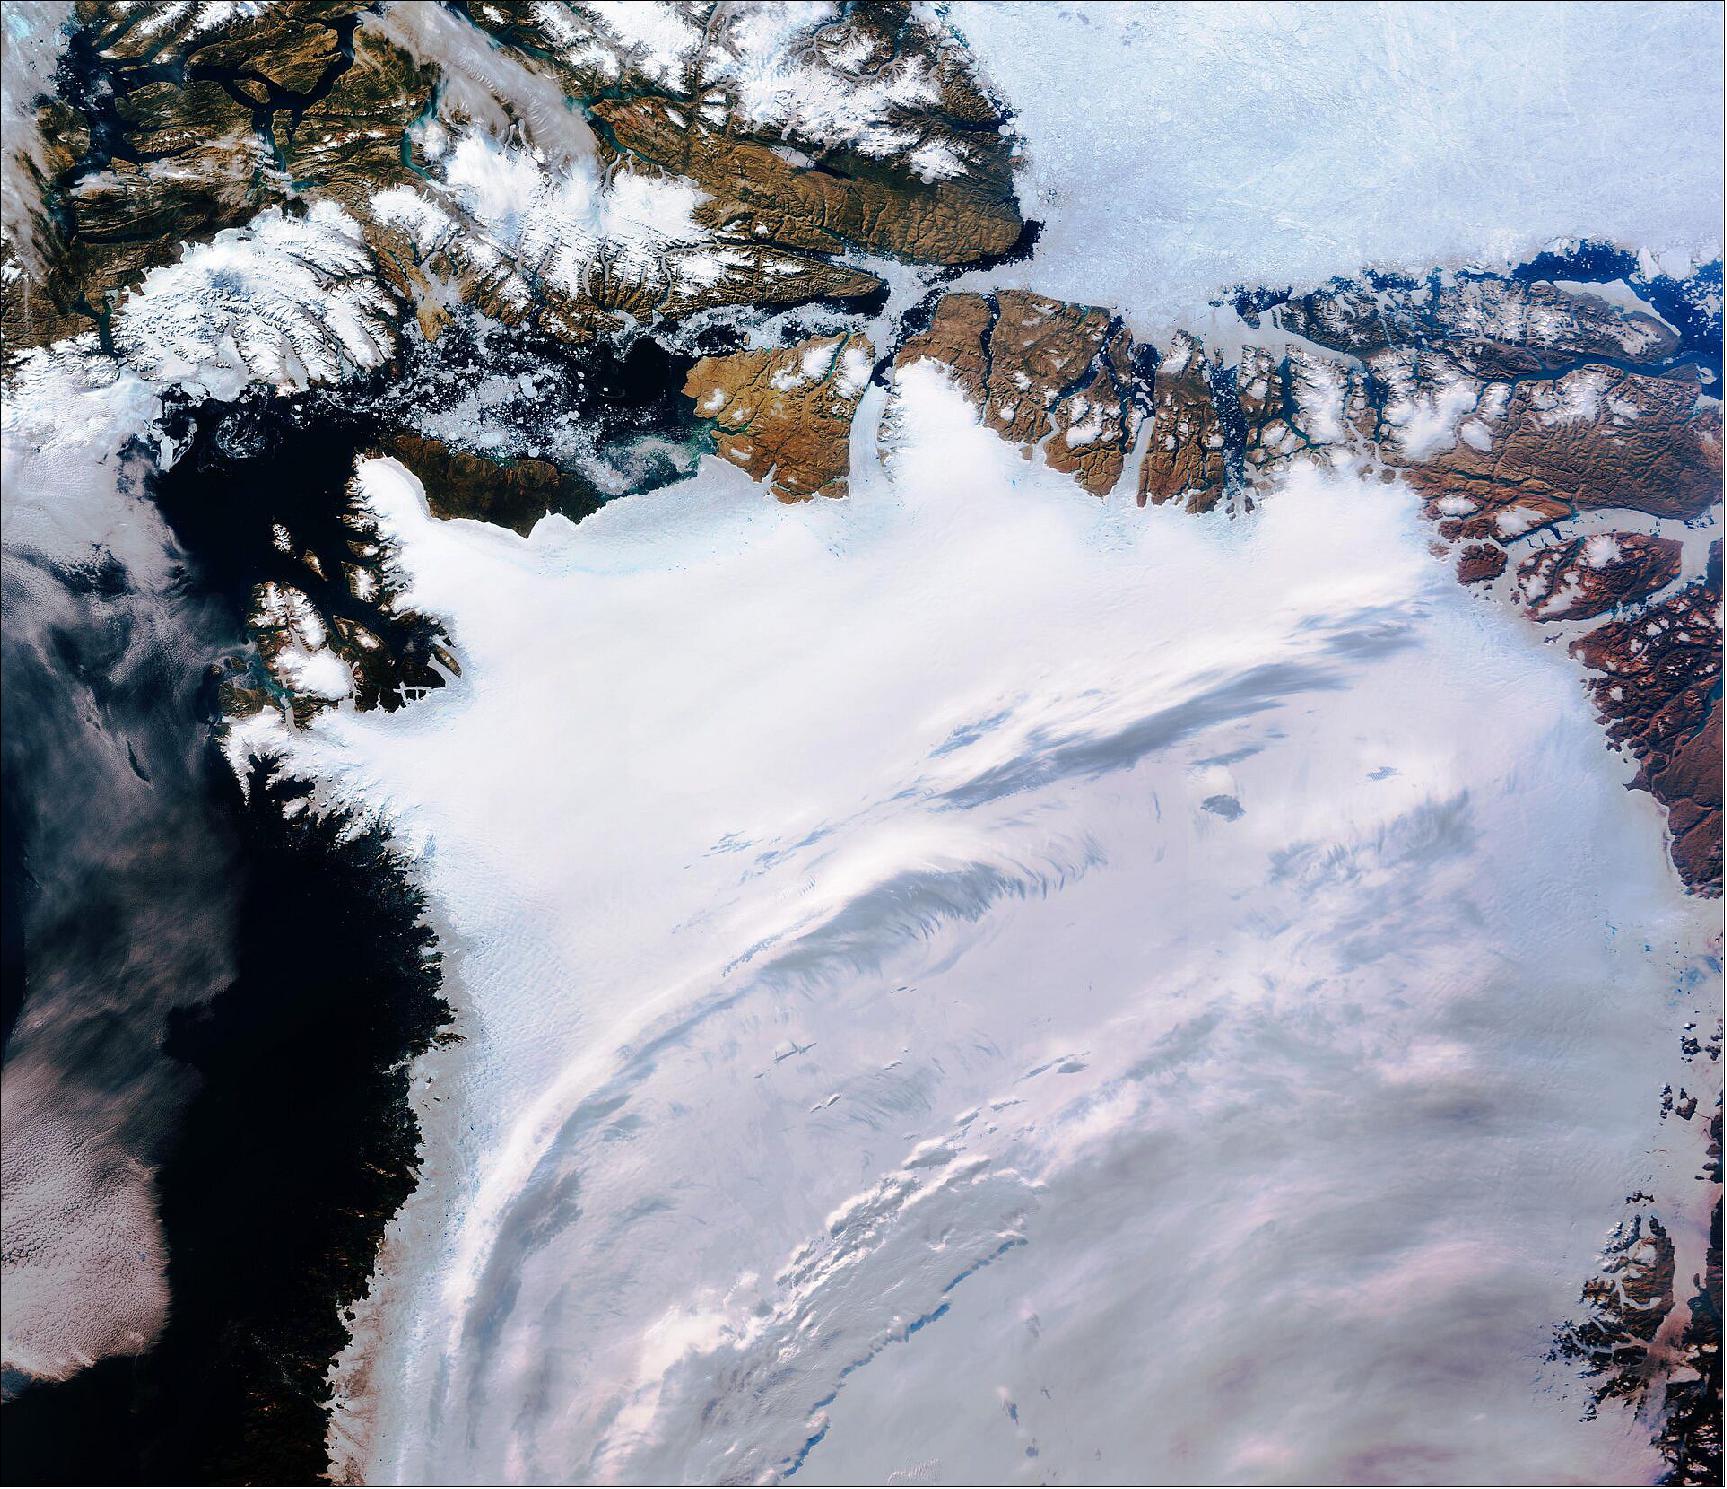 Figure 54: Northwest Greenland is featured in this icy image captured by the Copernicus Sentinel-3 mission. In the top center of this image, captured on 29 July 2019, the Petermann glacier is visible. Petermann is one of the largest glaciers connecting the Greenland ice sheet with the Arctic Ocean. Upon reaching the sea, a number of these large outlet glaciers extend into the water with a floating ‘ice tongue’. Icebergs occasionally break or ‘calve’ off these tongues. This image is also featured on the Earth from Space video program (image credit: ESA, the image contains modified Copernicus Sentinel data (2019), processed by ESA, CC BY-SA 3.0 IGO)